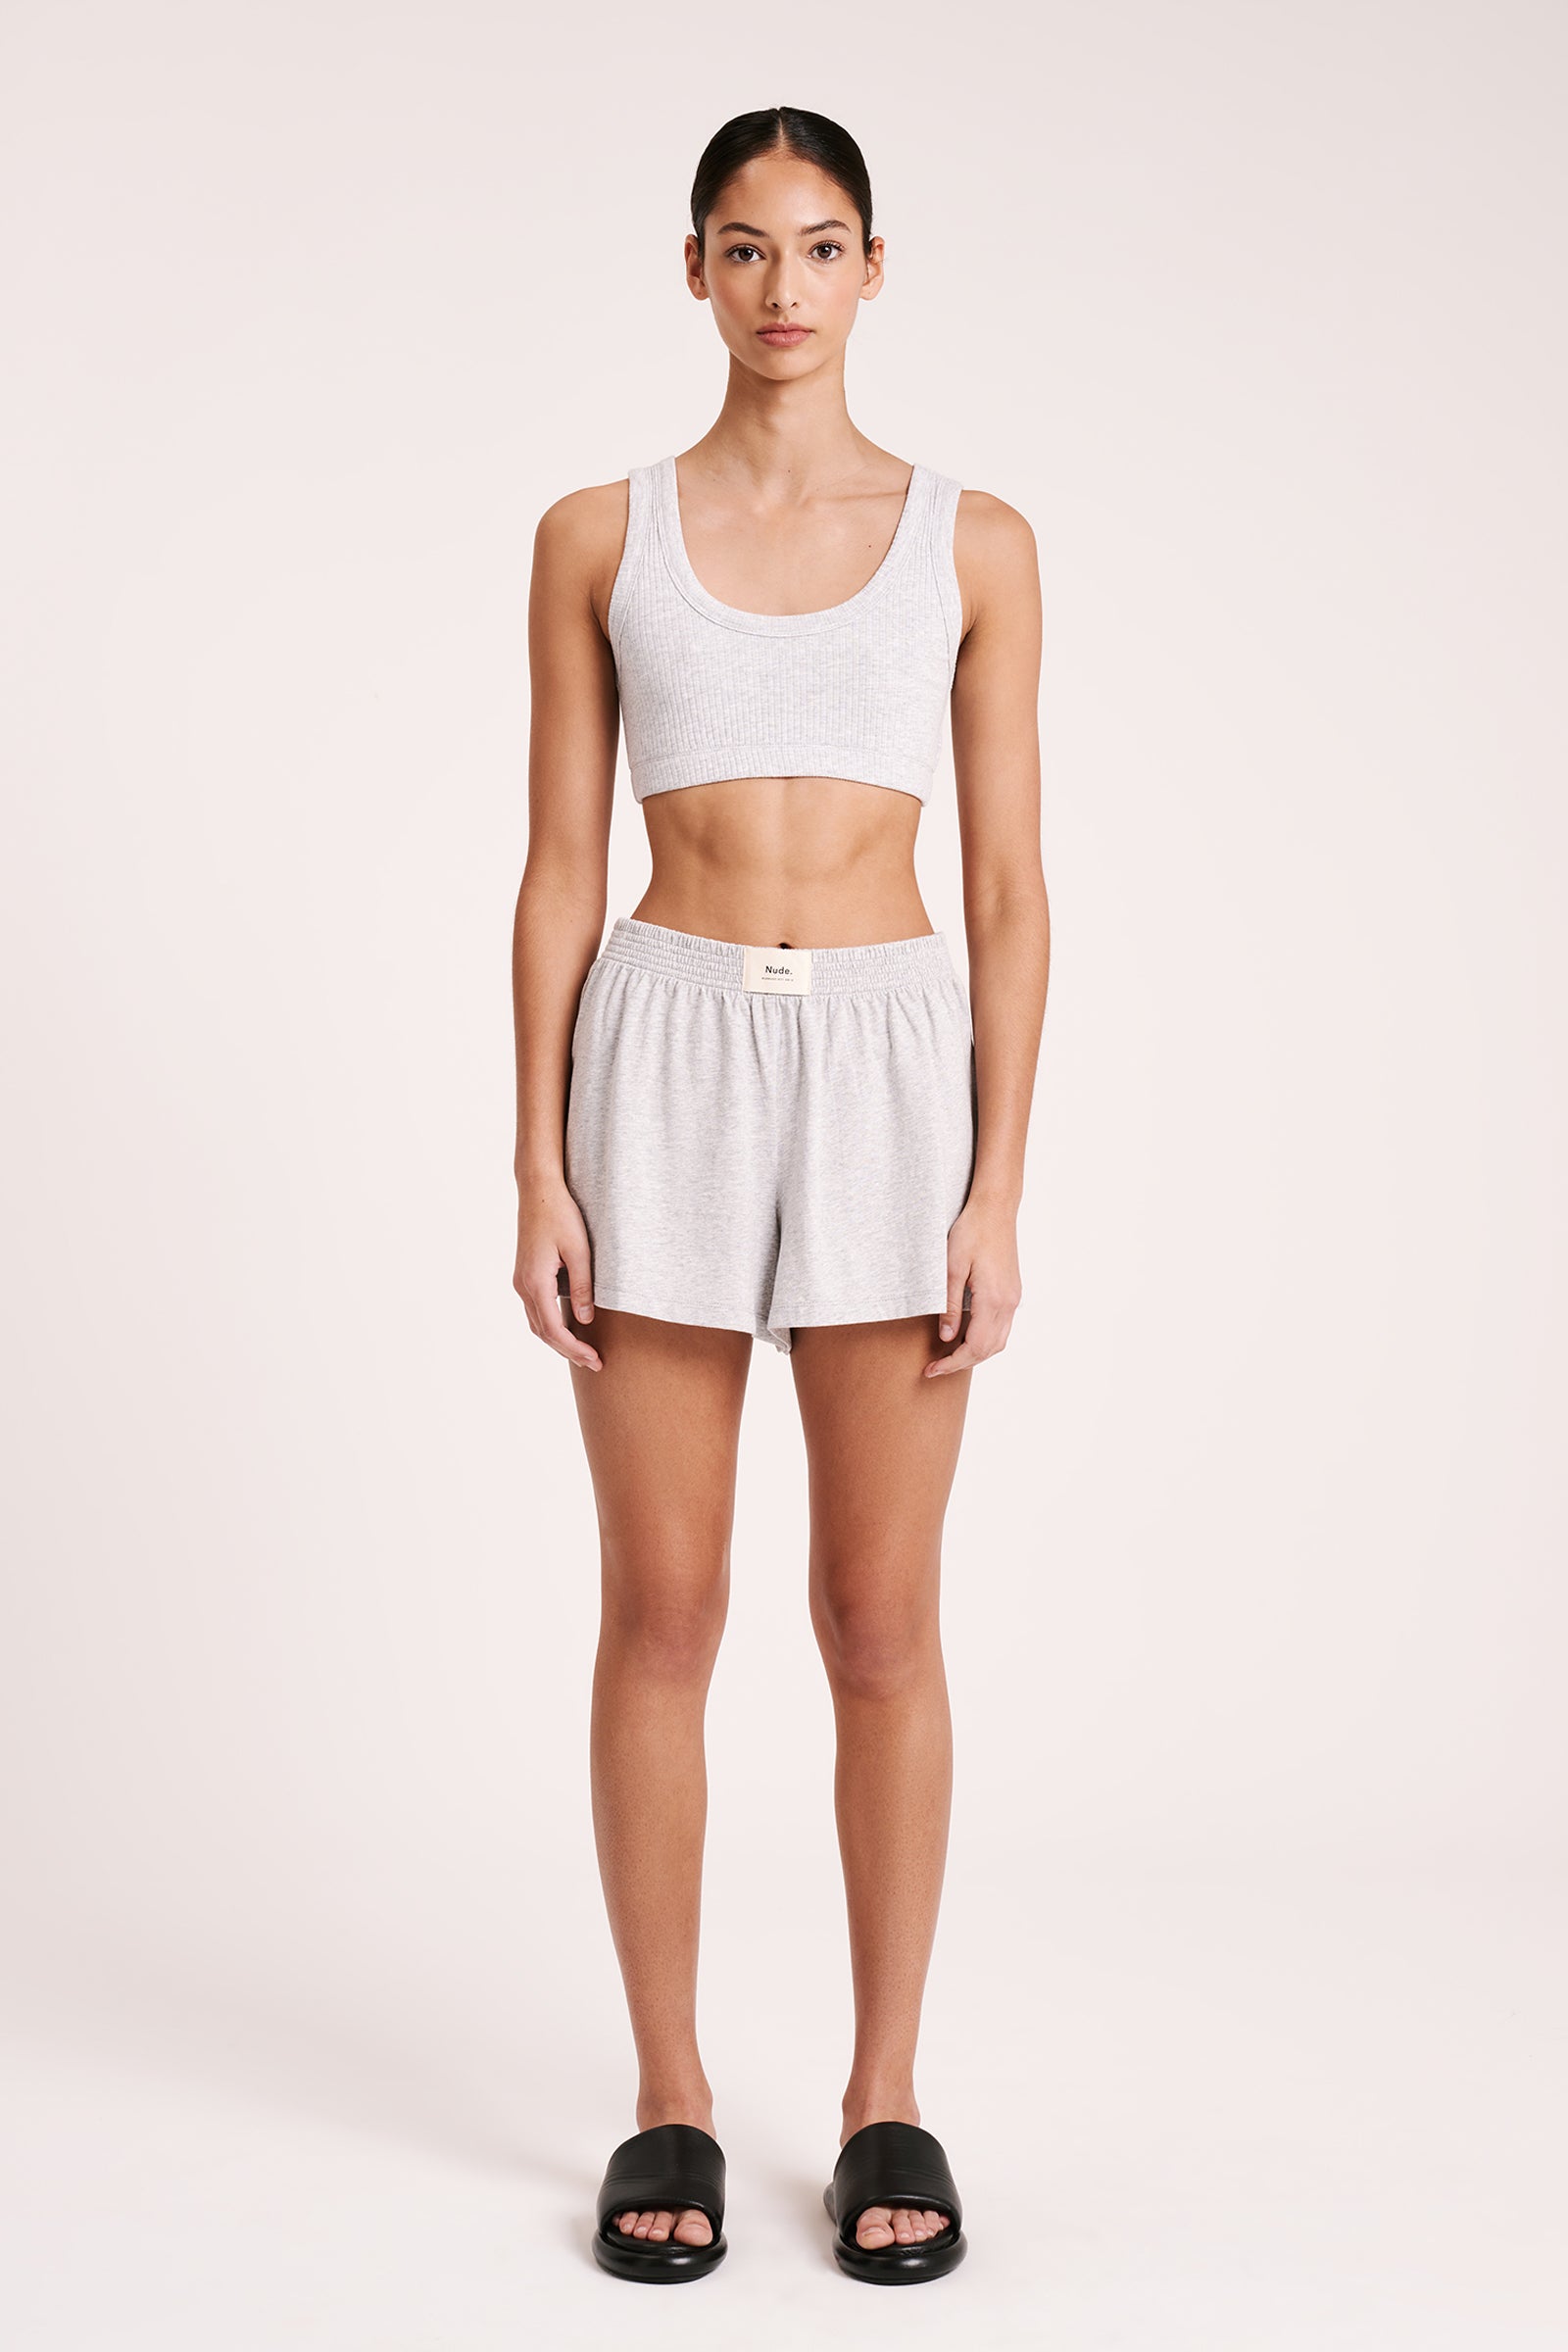 Nude Lucy | Lounge Jersey Short - Grey Marle